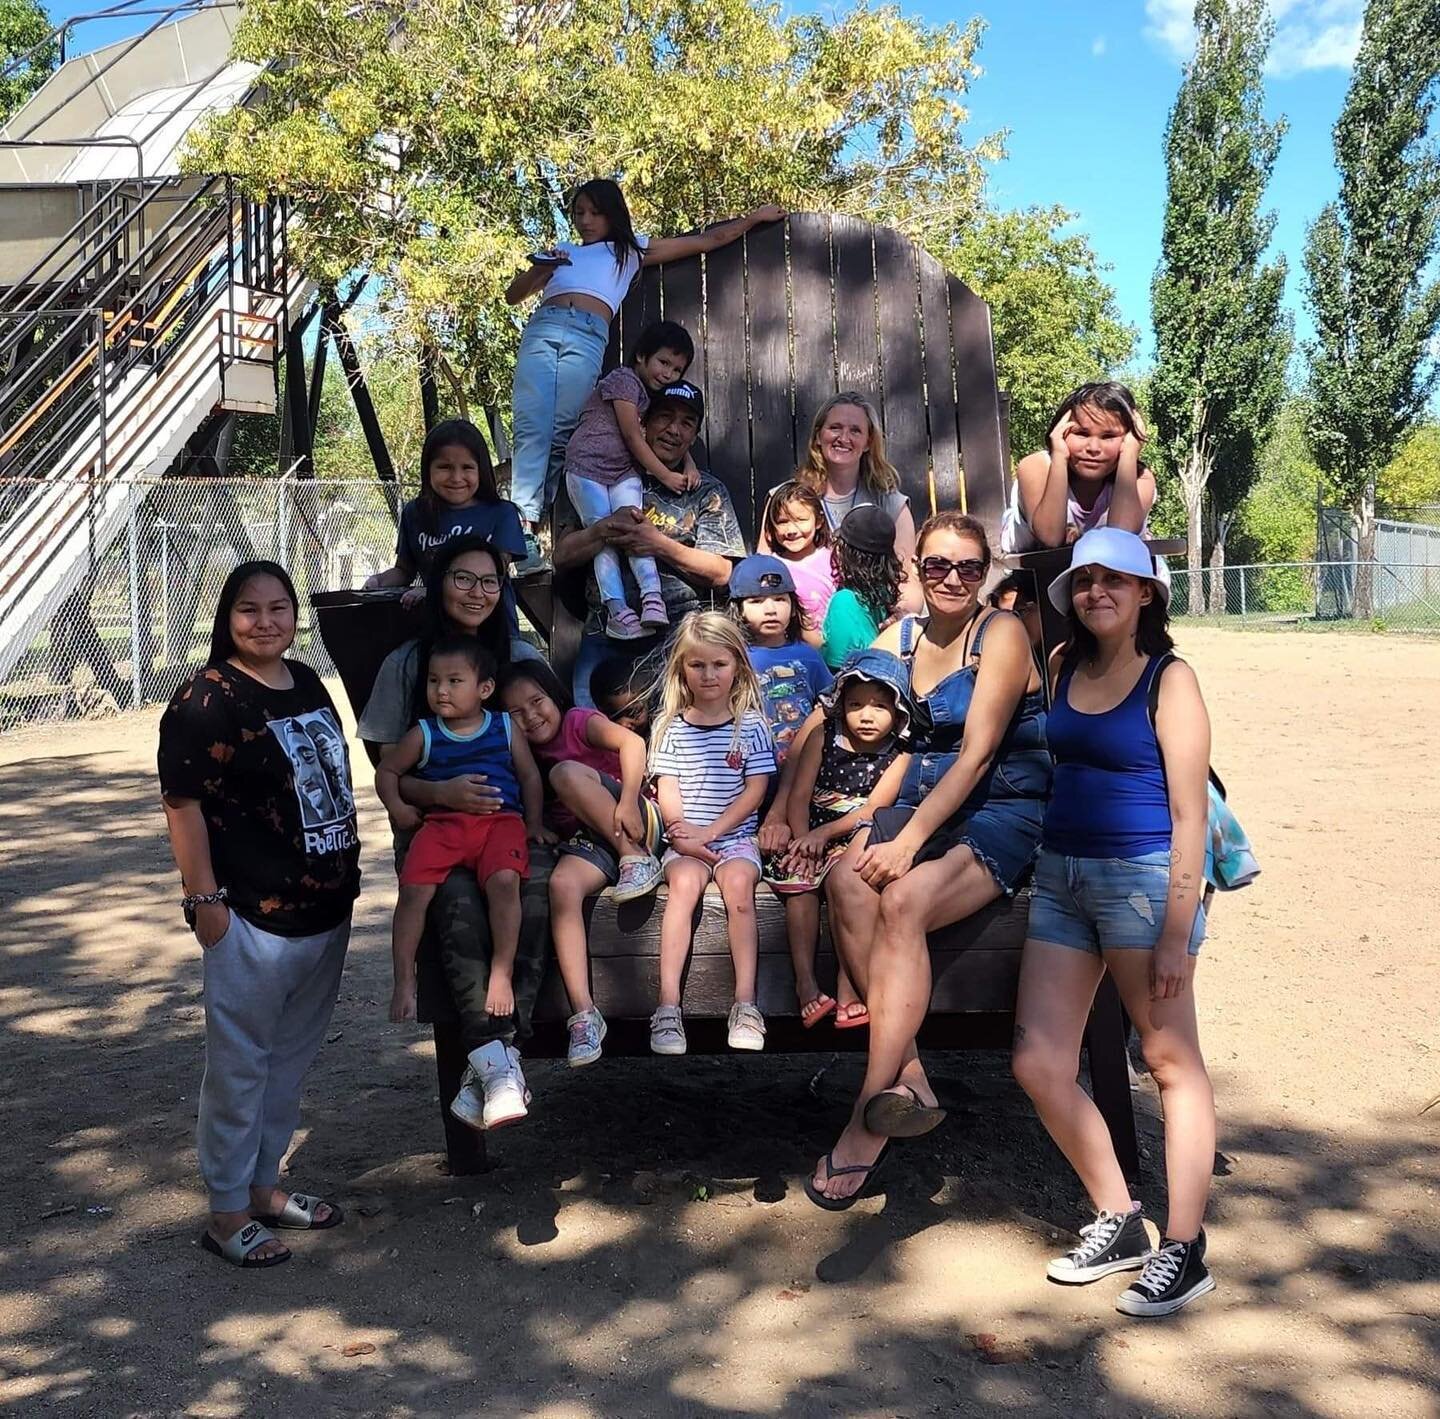 As the summer comes to an end our family literacy makes sure to enjoy every last minute of it! Yesterday they spent the day at Evraz, enjoying the park, animals and train! 🚂❤️🦌☀️ #teachermj #literacyadventures #ncfcsummer2022